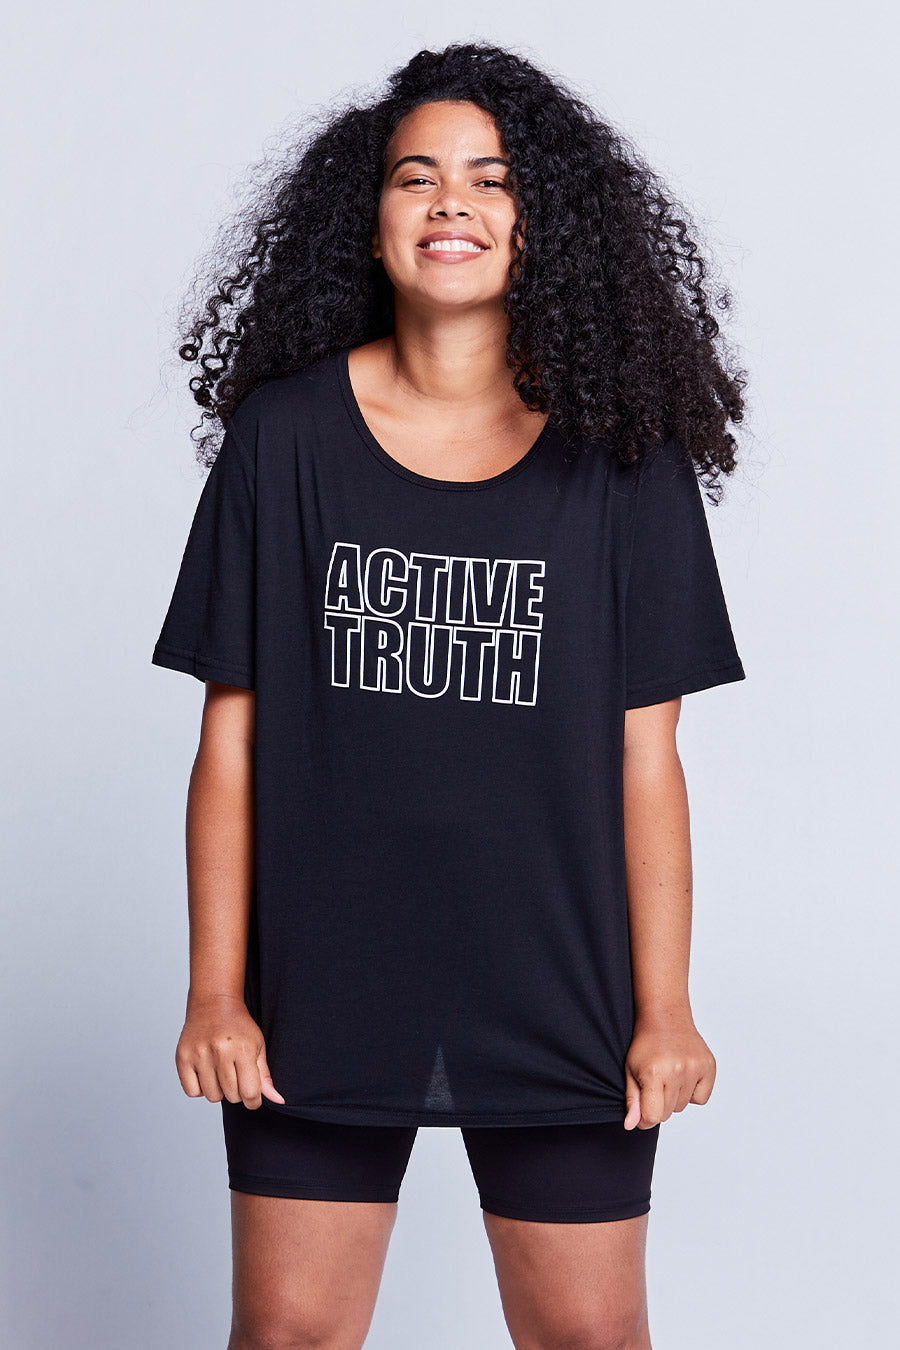 Active Truth T-Shirt - Black from Active Truth™
